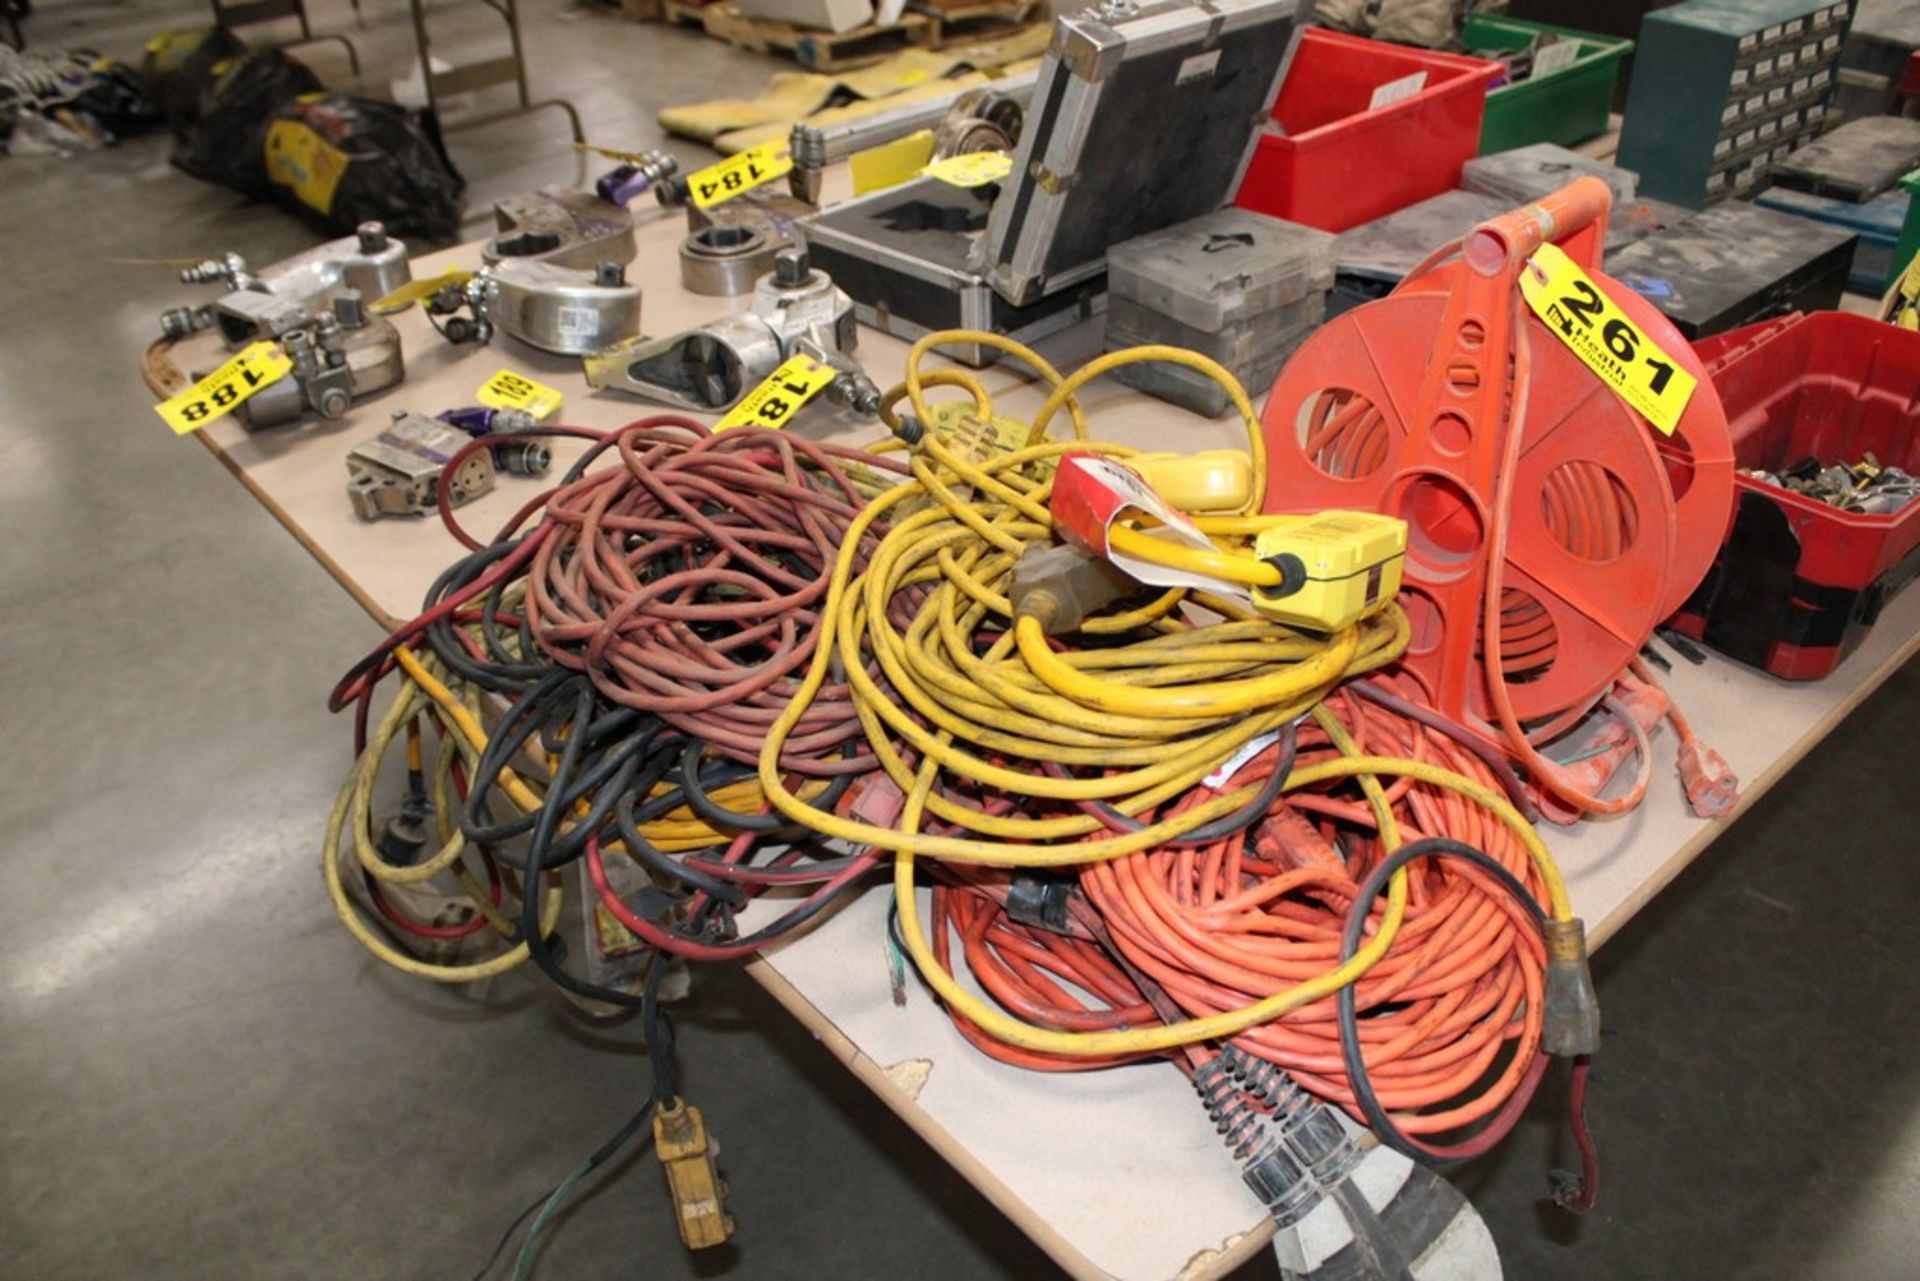 ASSORTED EXTENSION CORDS AND GFCI